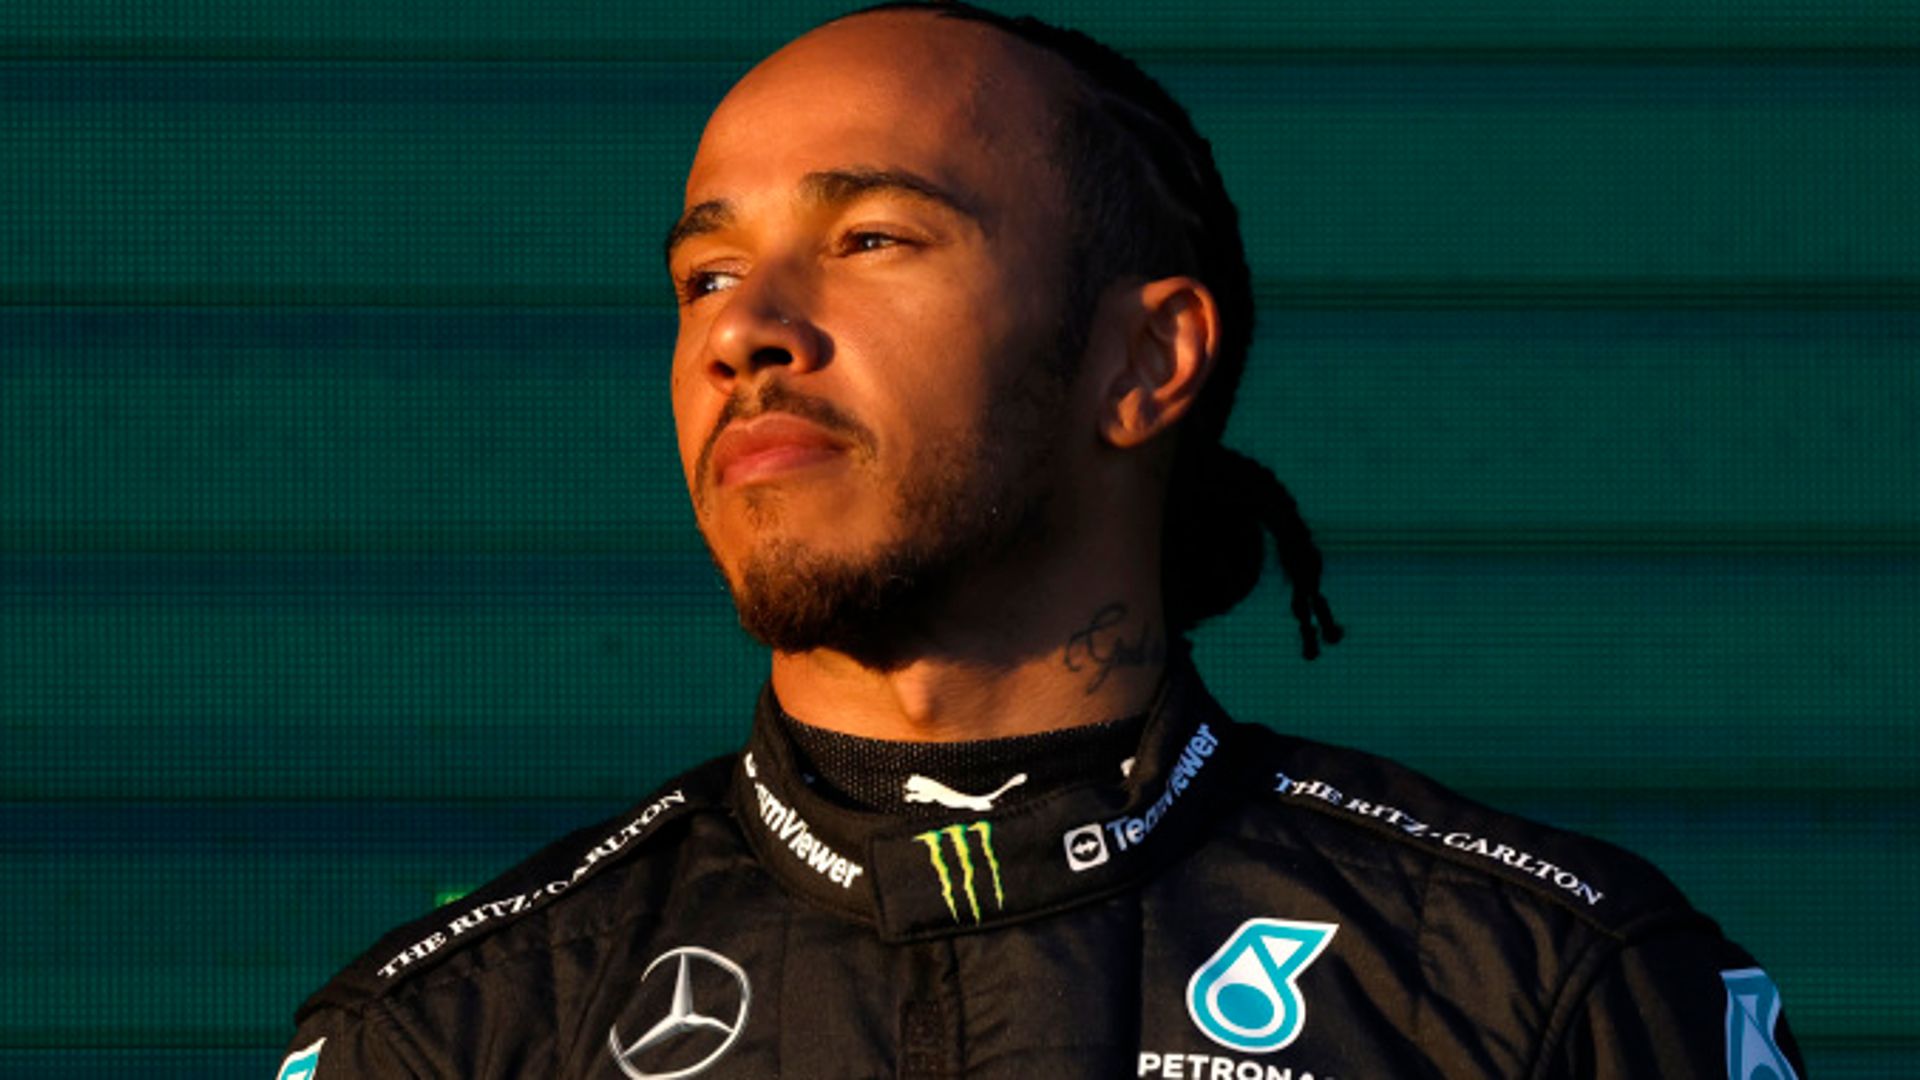 Will Hamilton sign a new Mercedes deal? | Who would replace him?